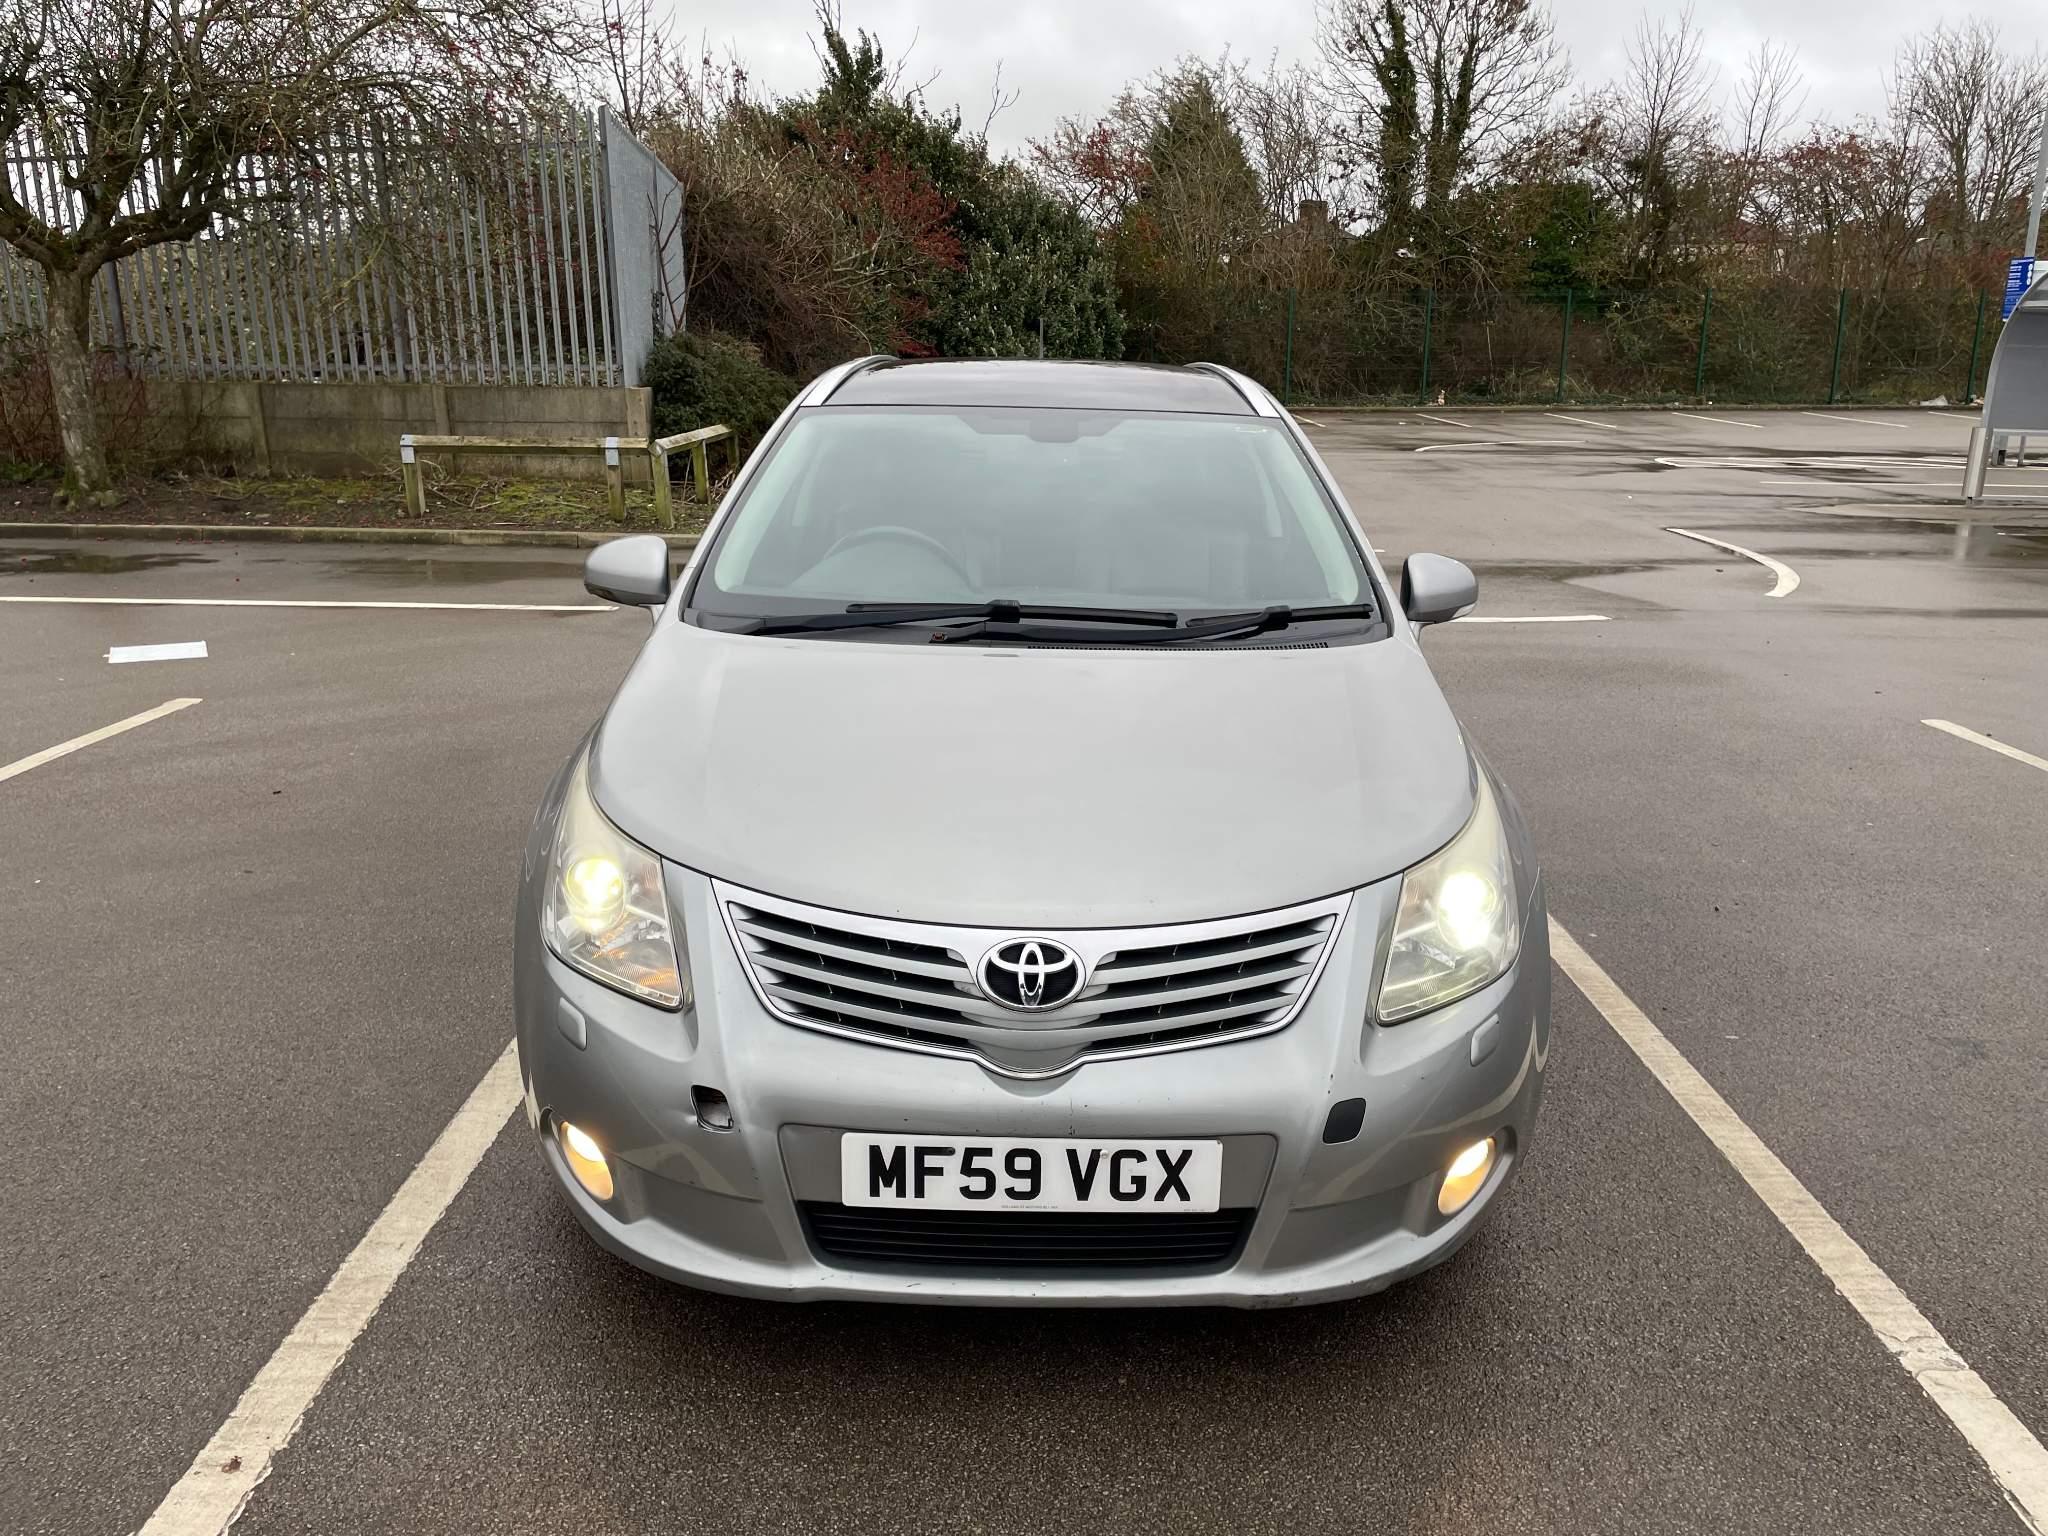 Used Toyota Avensis - 2003-2009 Reliability & Common Problems